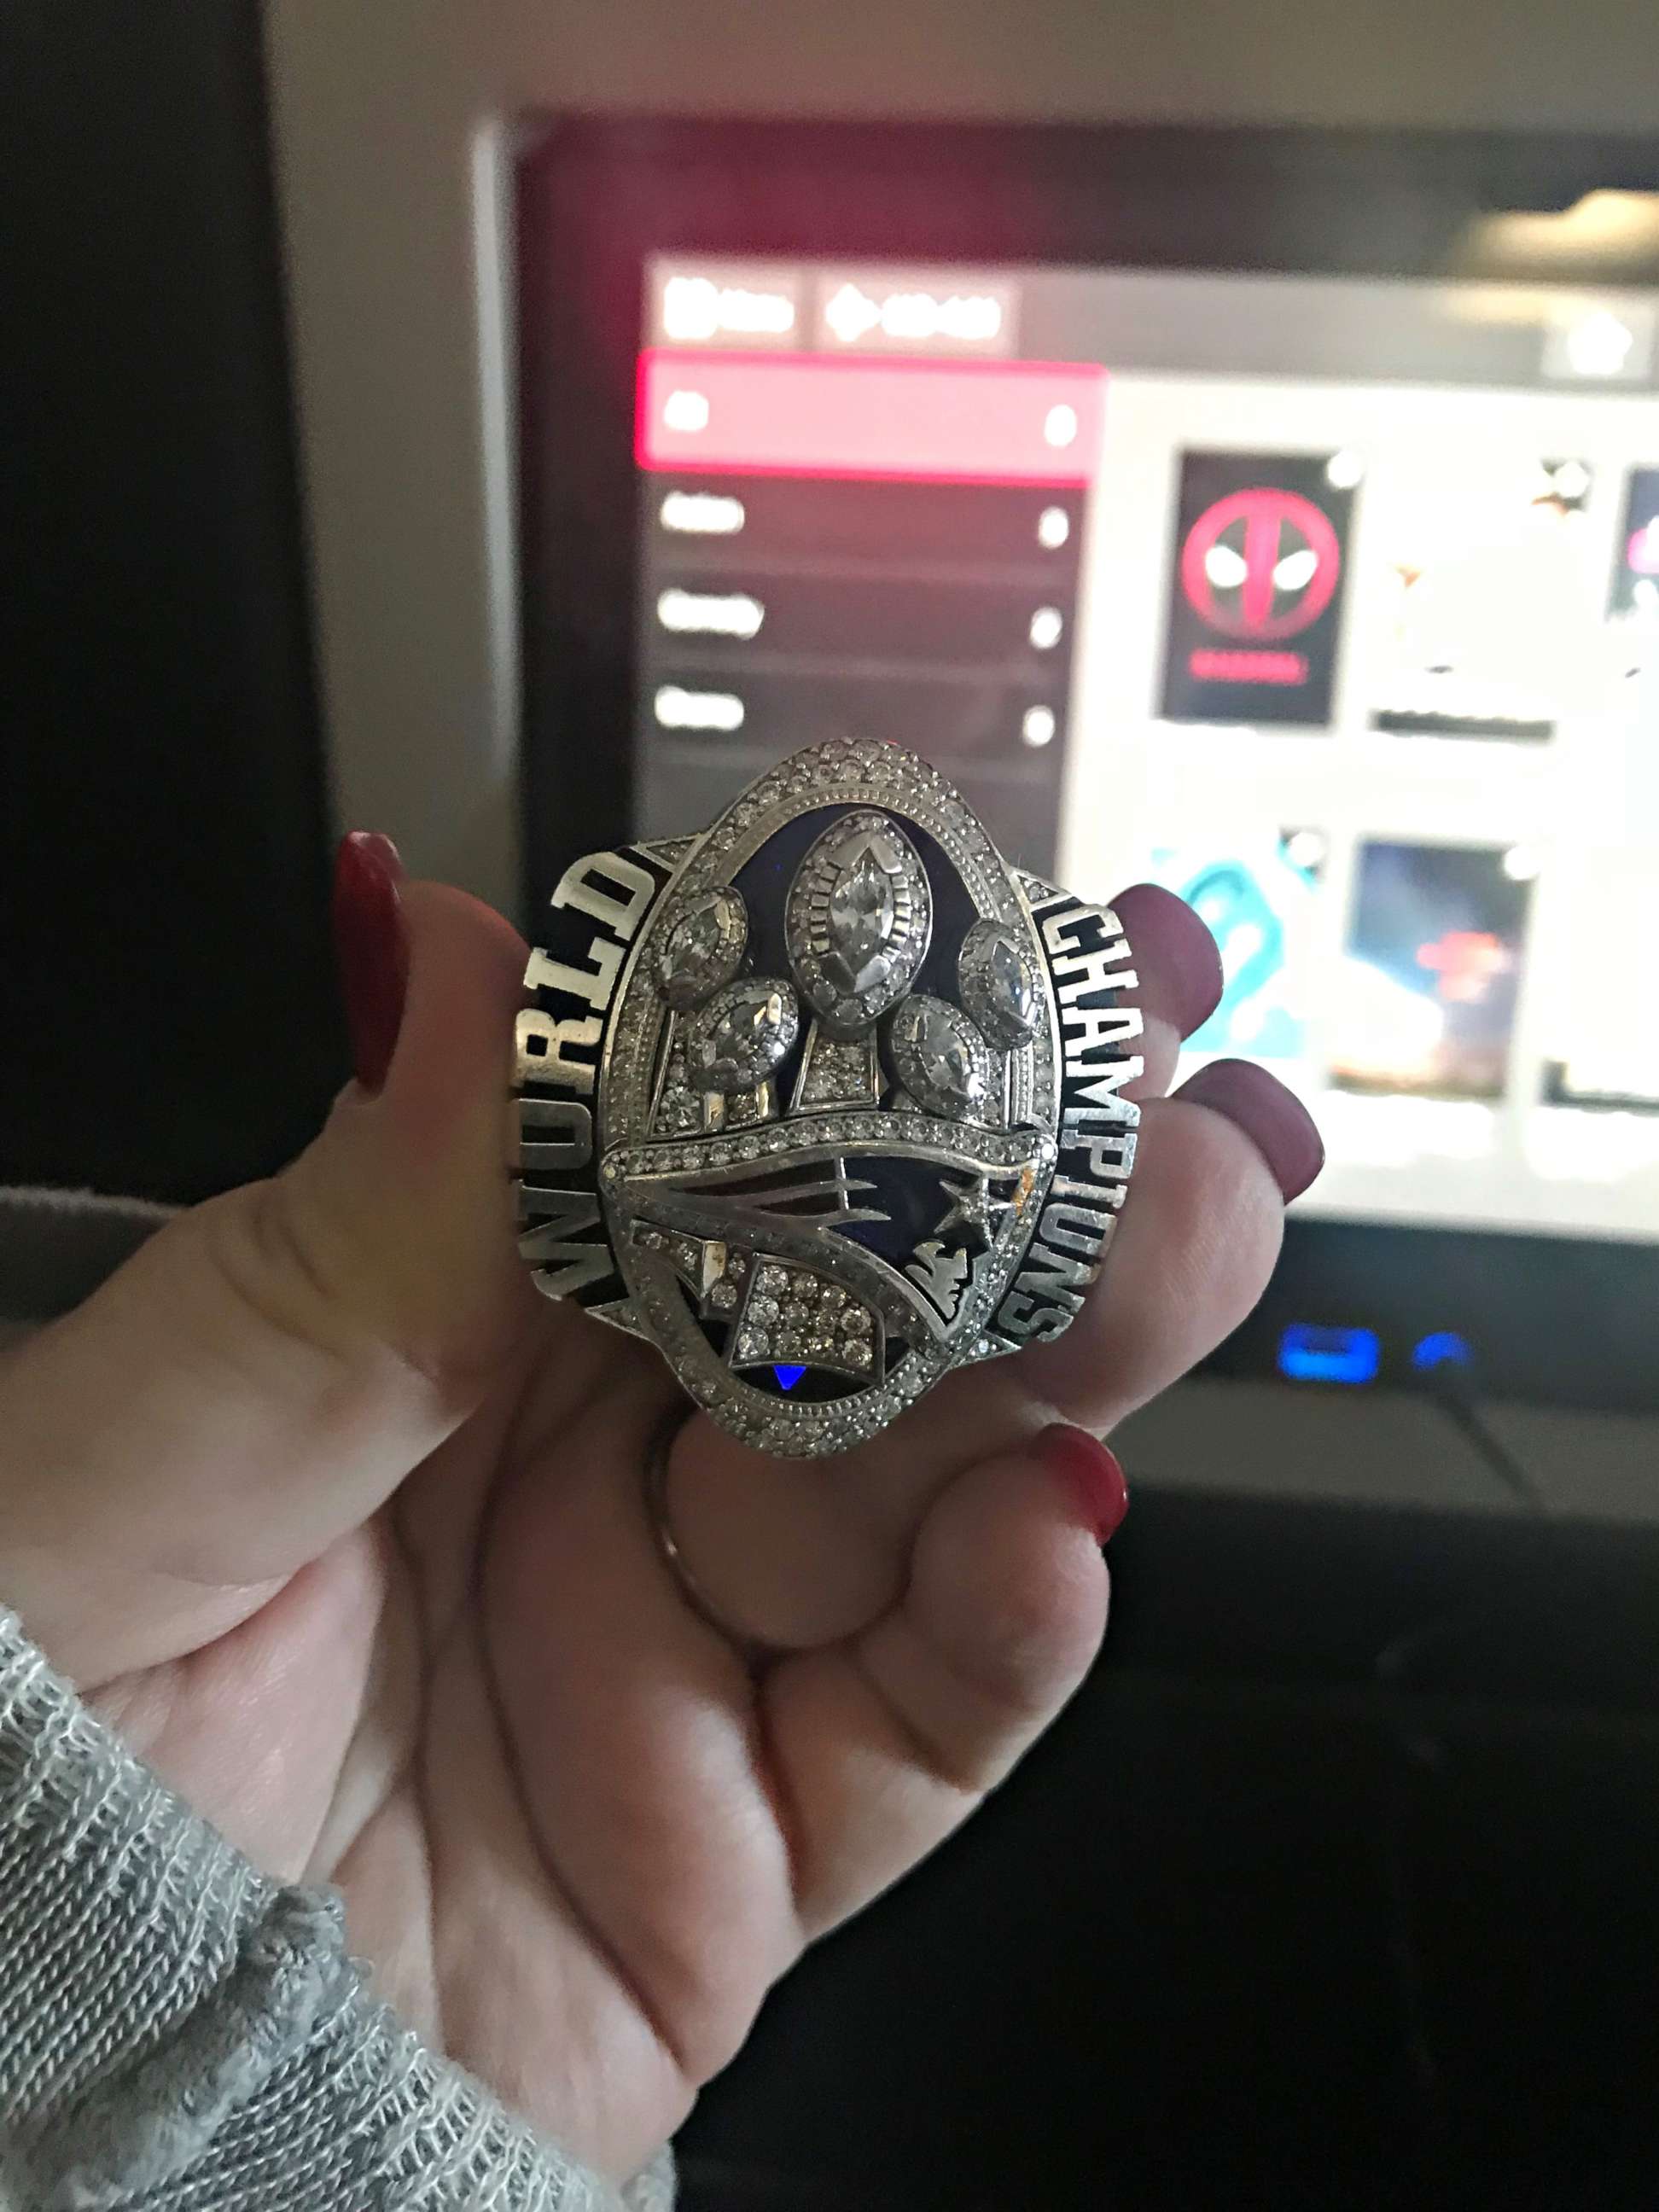 PHOTO: A senior operations manager for the New England Patriots was on the flight and let everyone hold the Super Bowl LI championship ring, parent Meredith Barry told ABC News. 